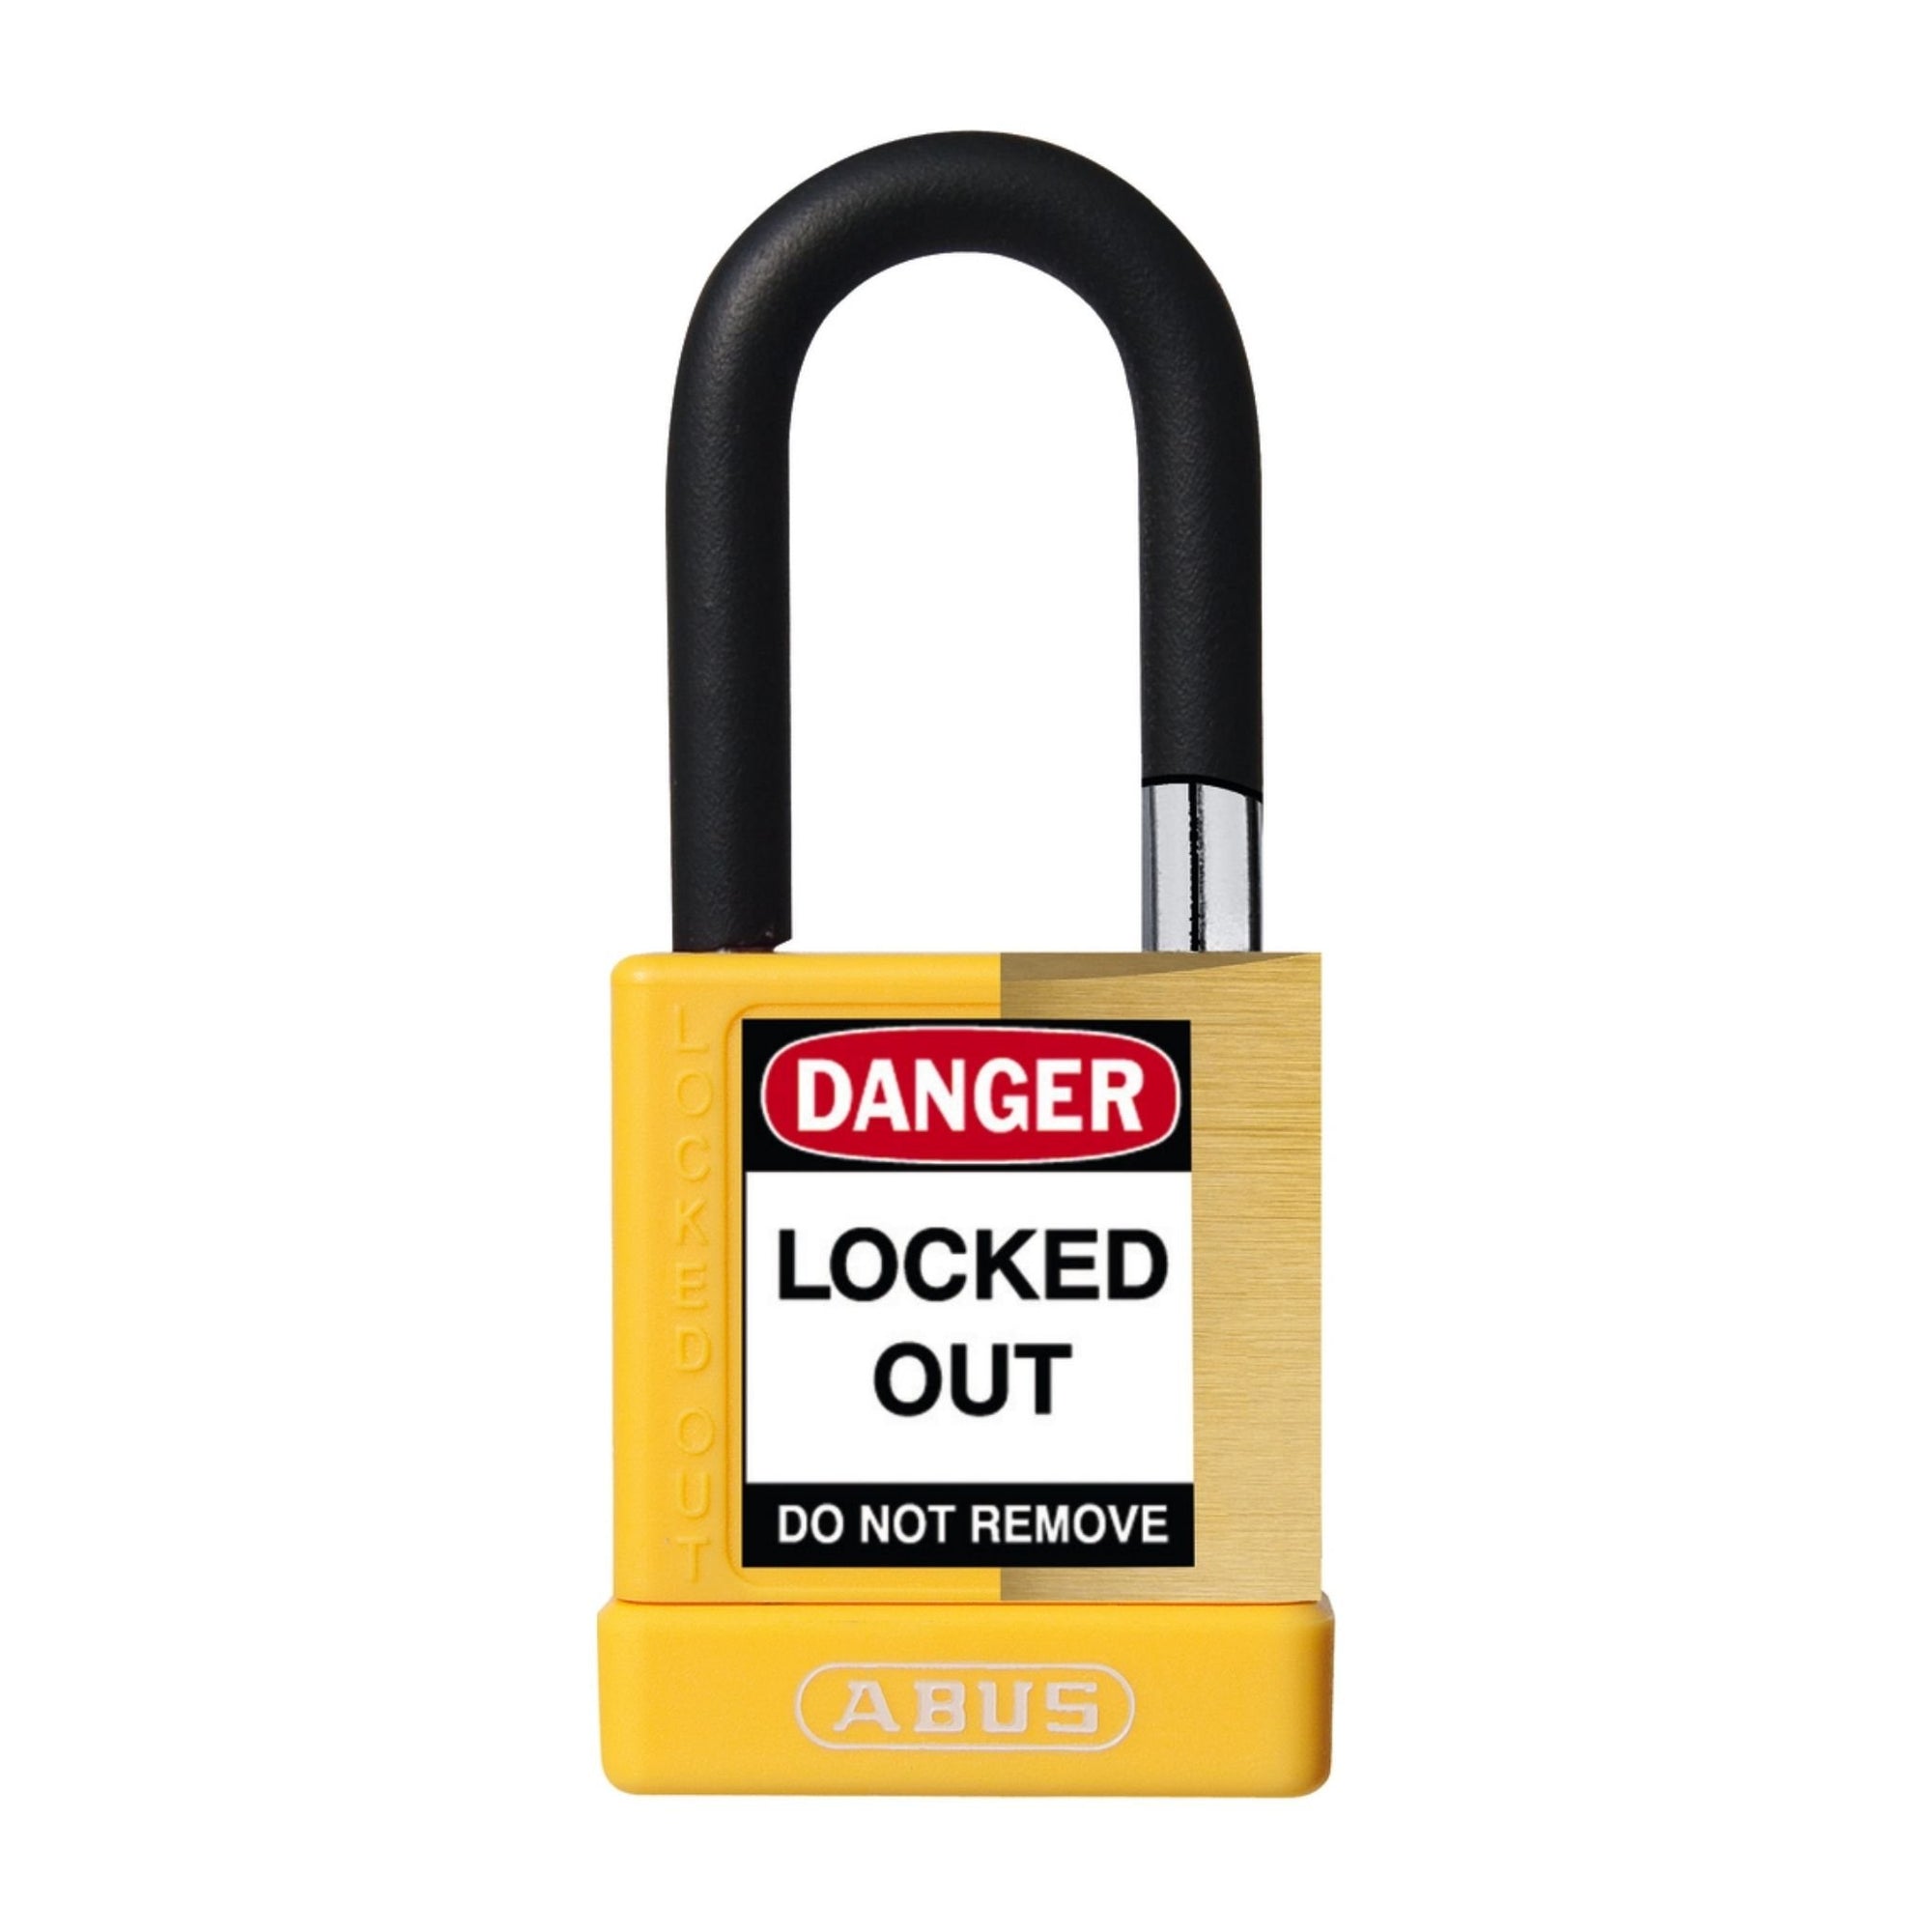 Abus 74M/40 MK Yellow Insulated Brass Safety Padlock with 1-1/2" Shackle - The Lock Source